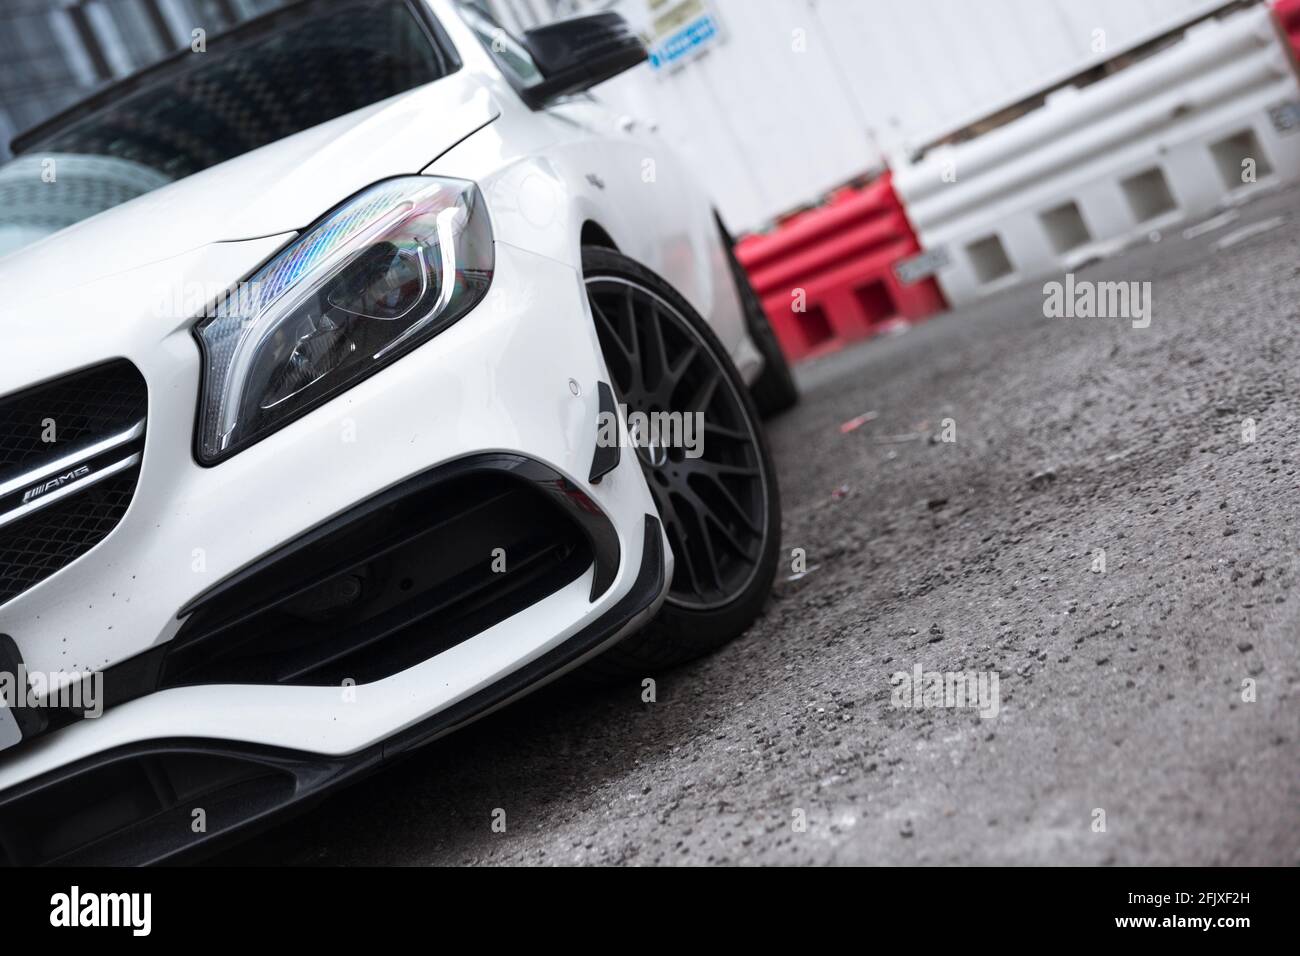 https://c8.alamy.com/comp/2FJXF2H/the-front-led-headlight-with-amg-branding-on-a-cirrus-white-2017-mercedes-benz-a45-amg-w176-with-aero-pack-and-gloss-black-alloy-wheels-2FJXF2H.jpg